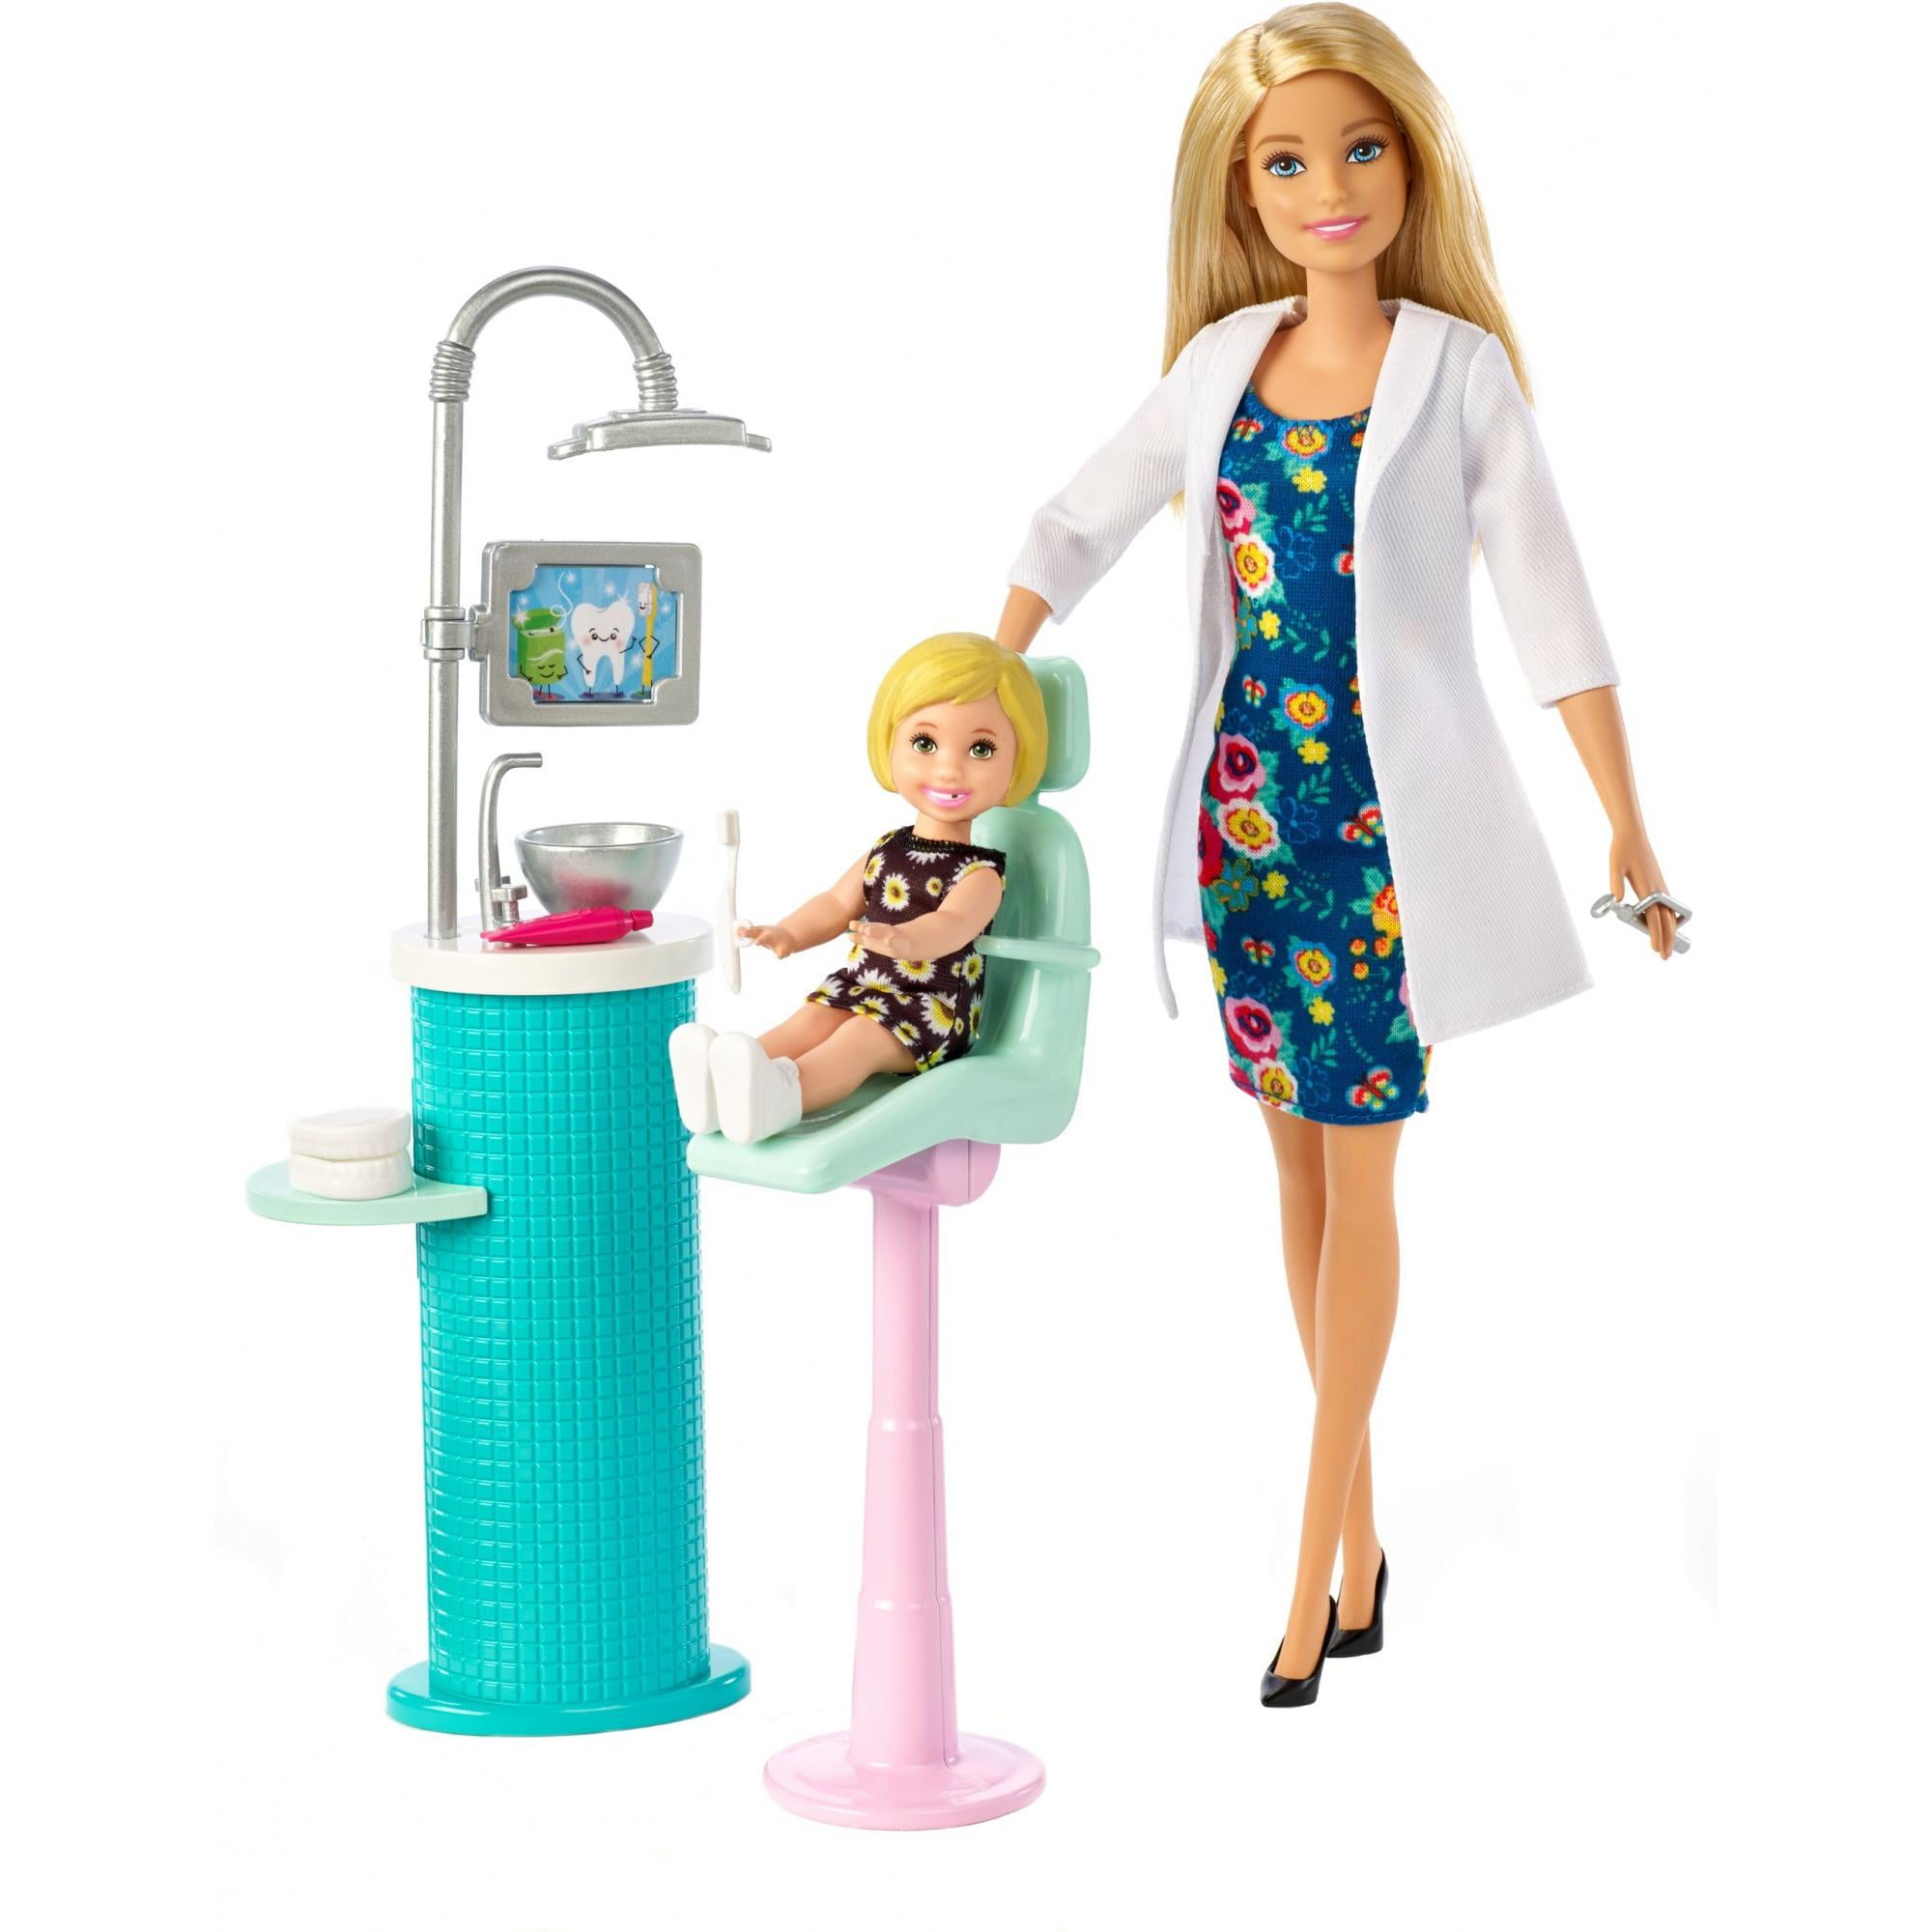 Play Barbie FRM19 Careers Care Clinic Ambulance Role Model Multicolor 